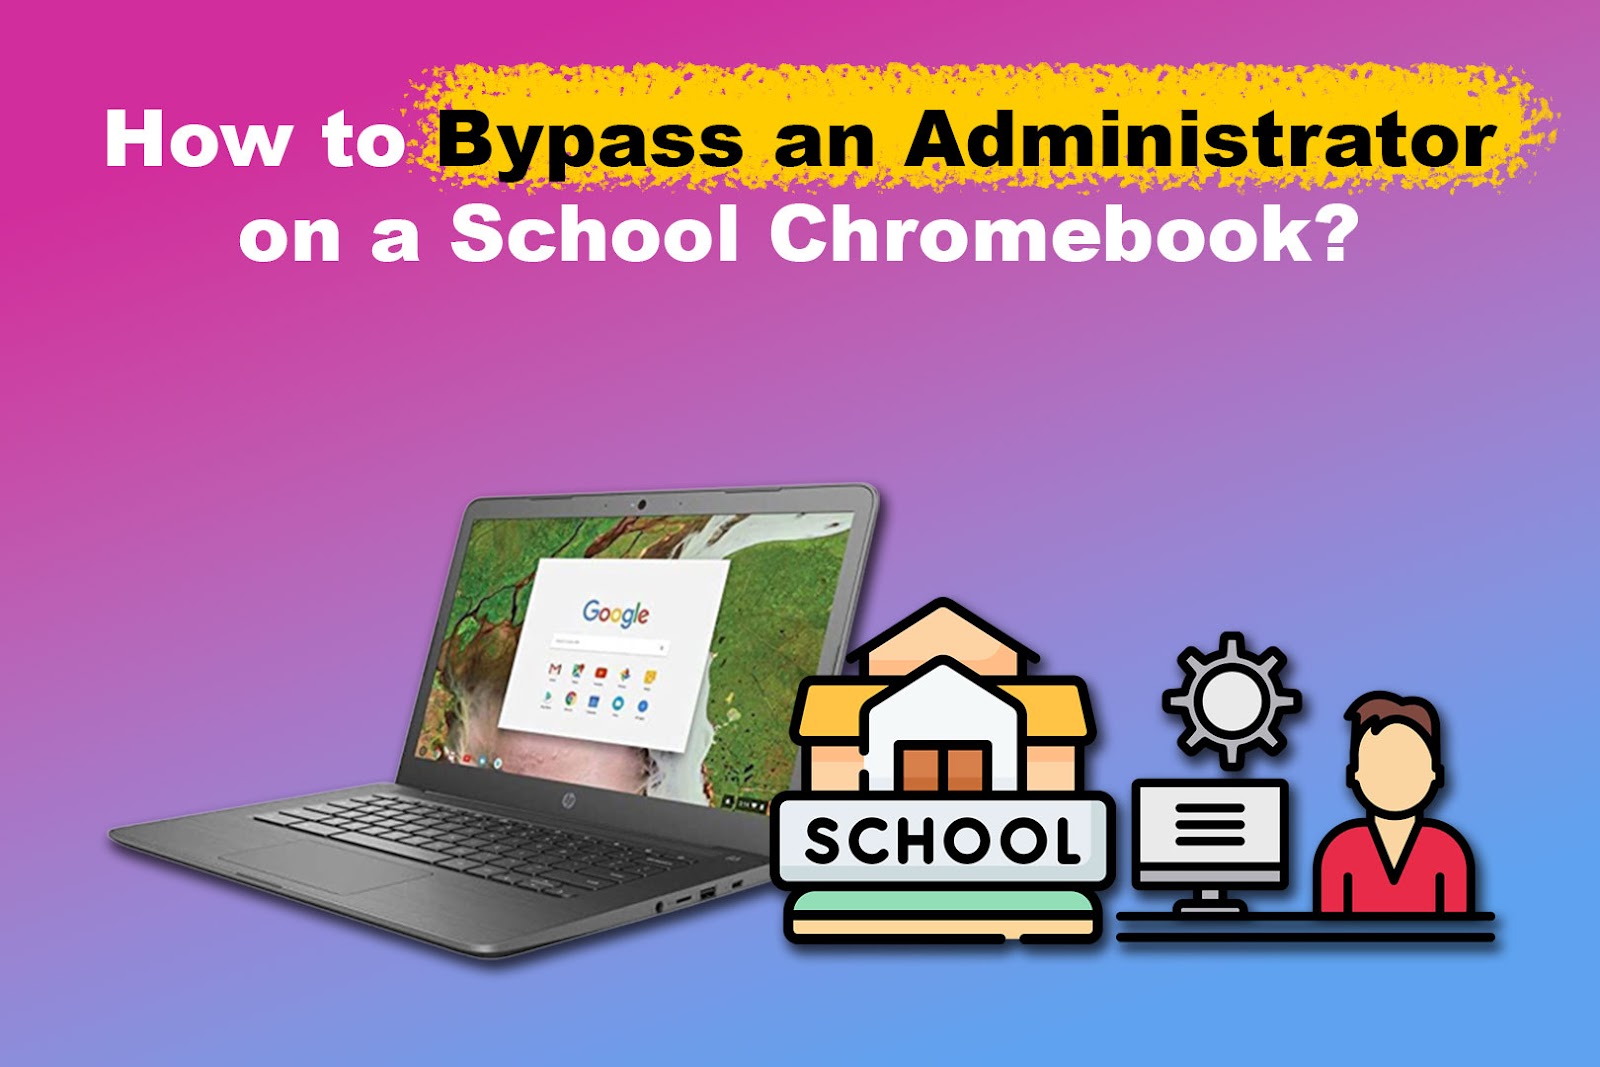 How to Bypass an Administrator on a School Chromebook